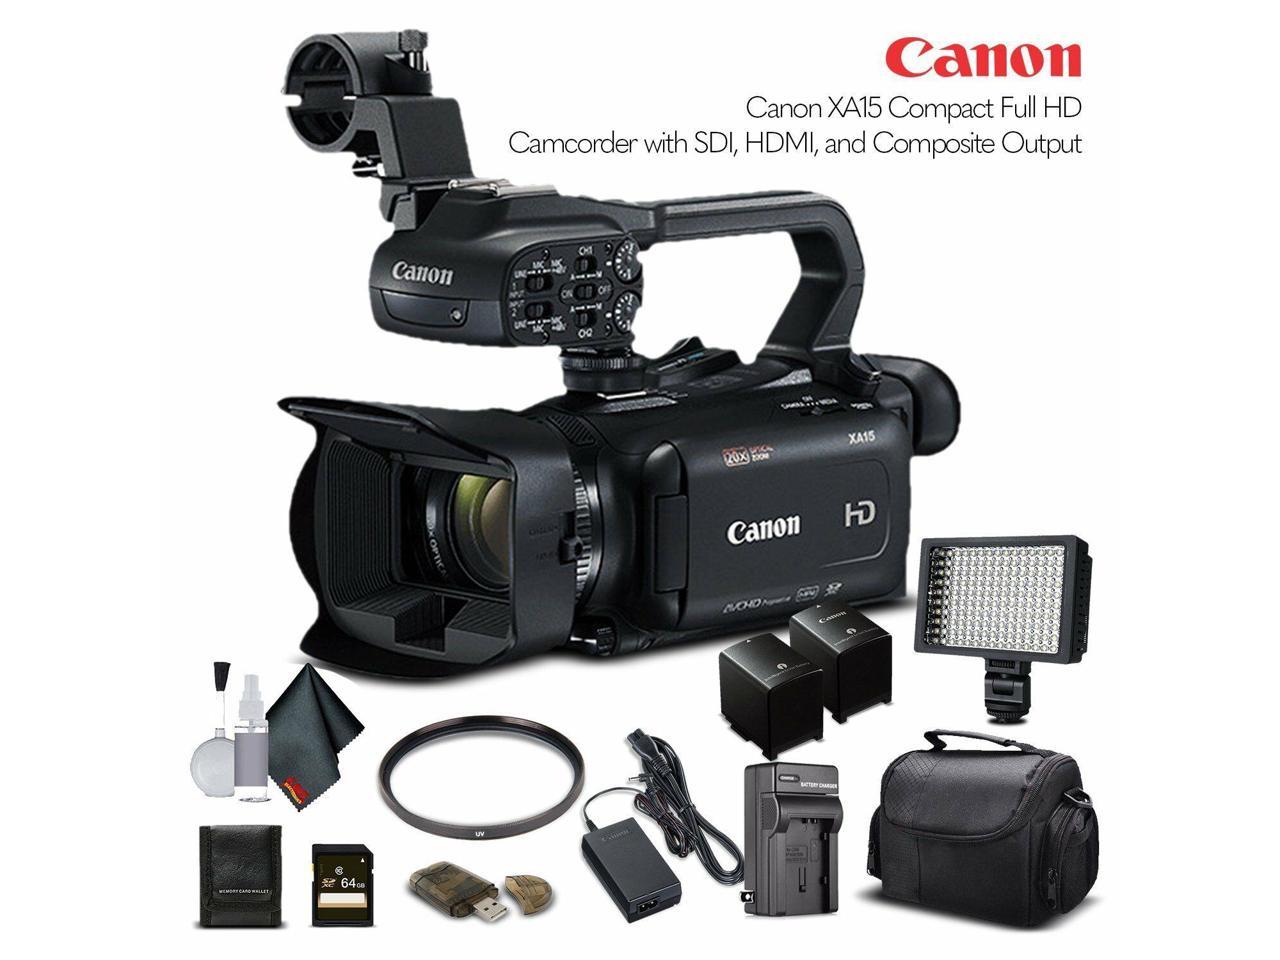 Canon XA15 Compact Full HD Camcorder 2217C002 With 64GB Memory Card, Extra Battery and Charger, UV Filter, LED Light, Case and More. - Starter Bundle